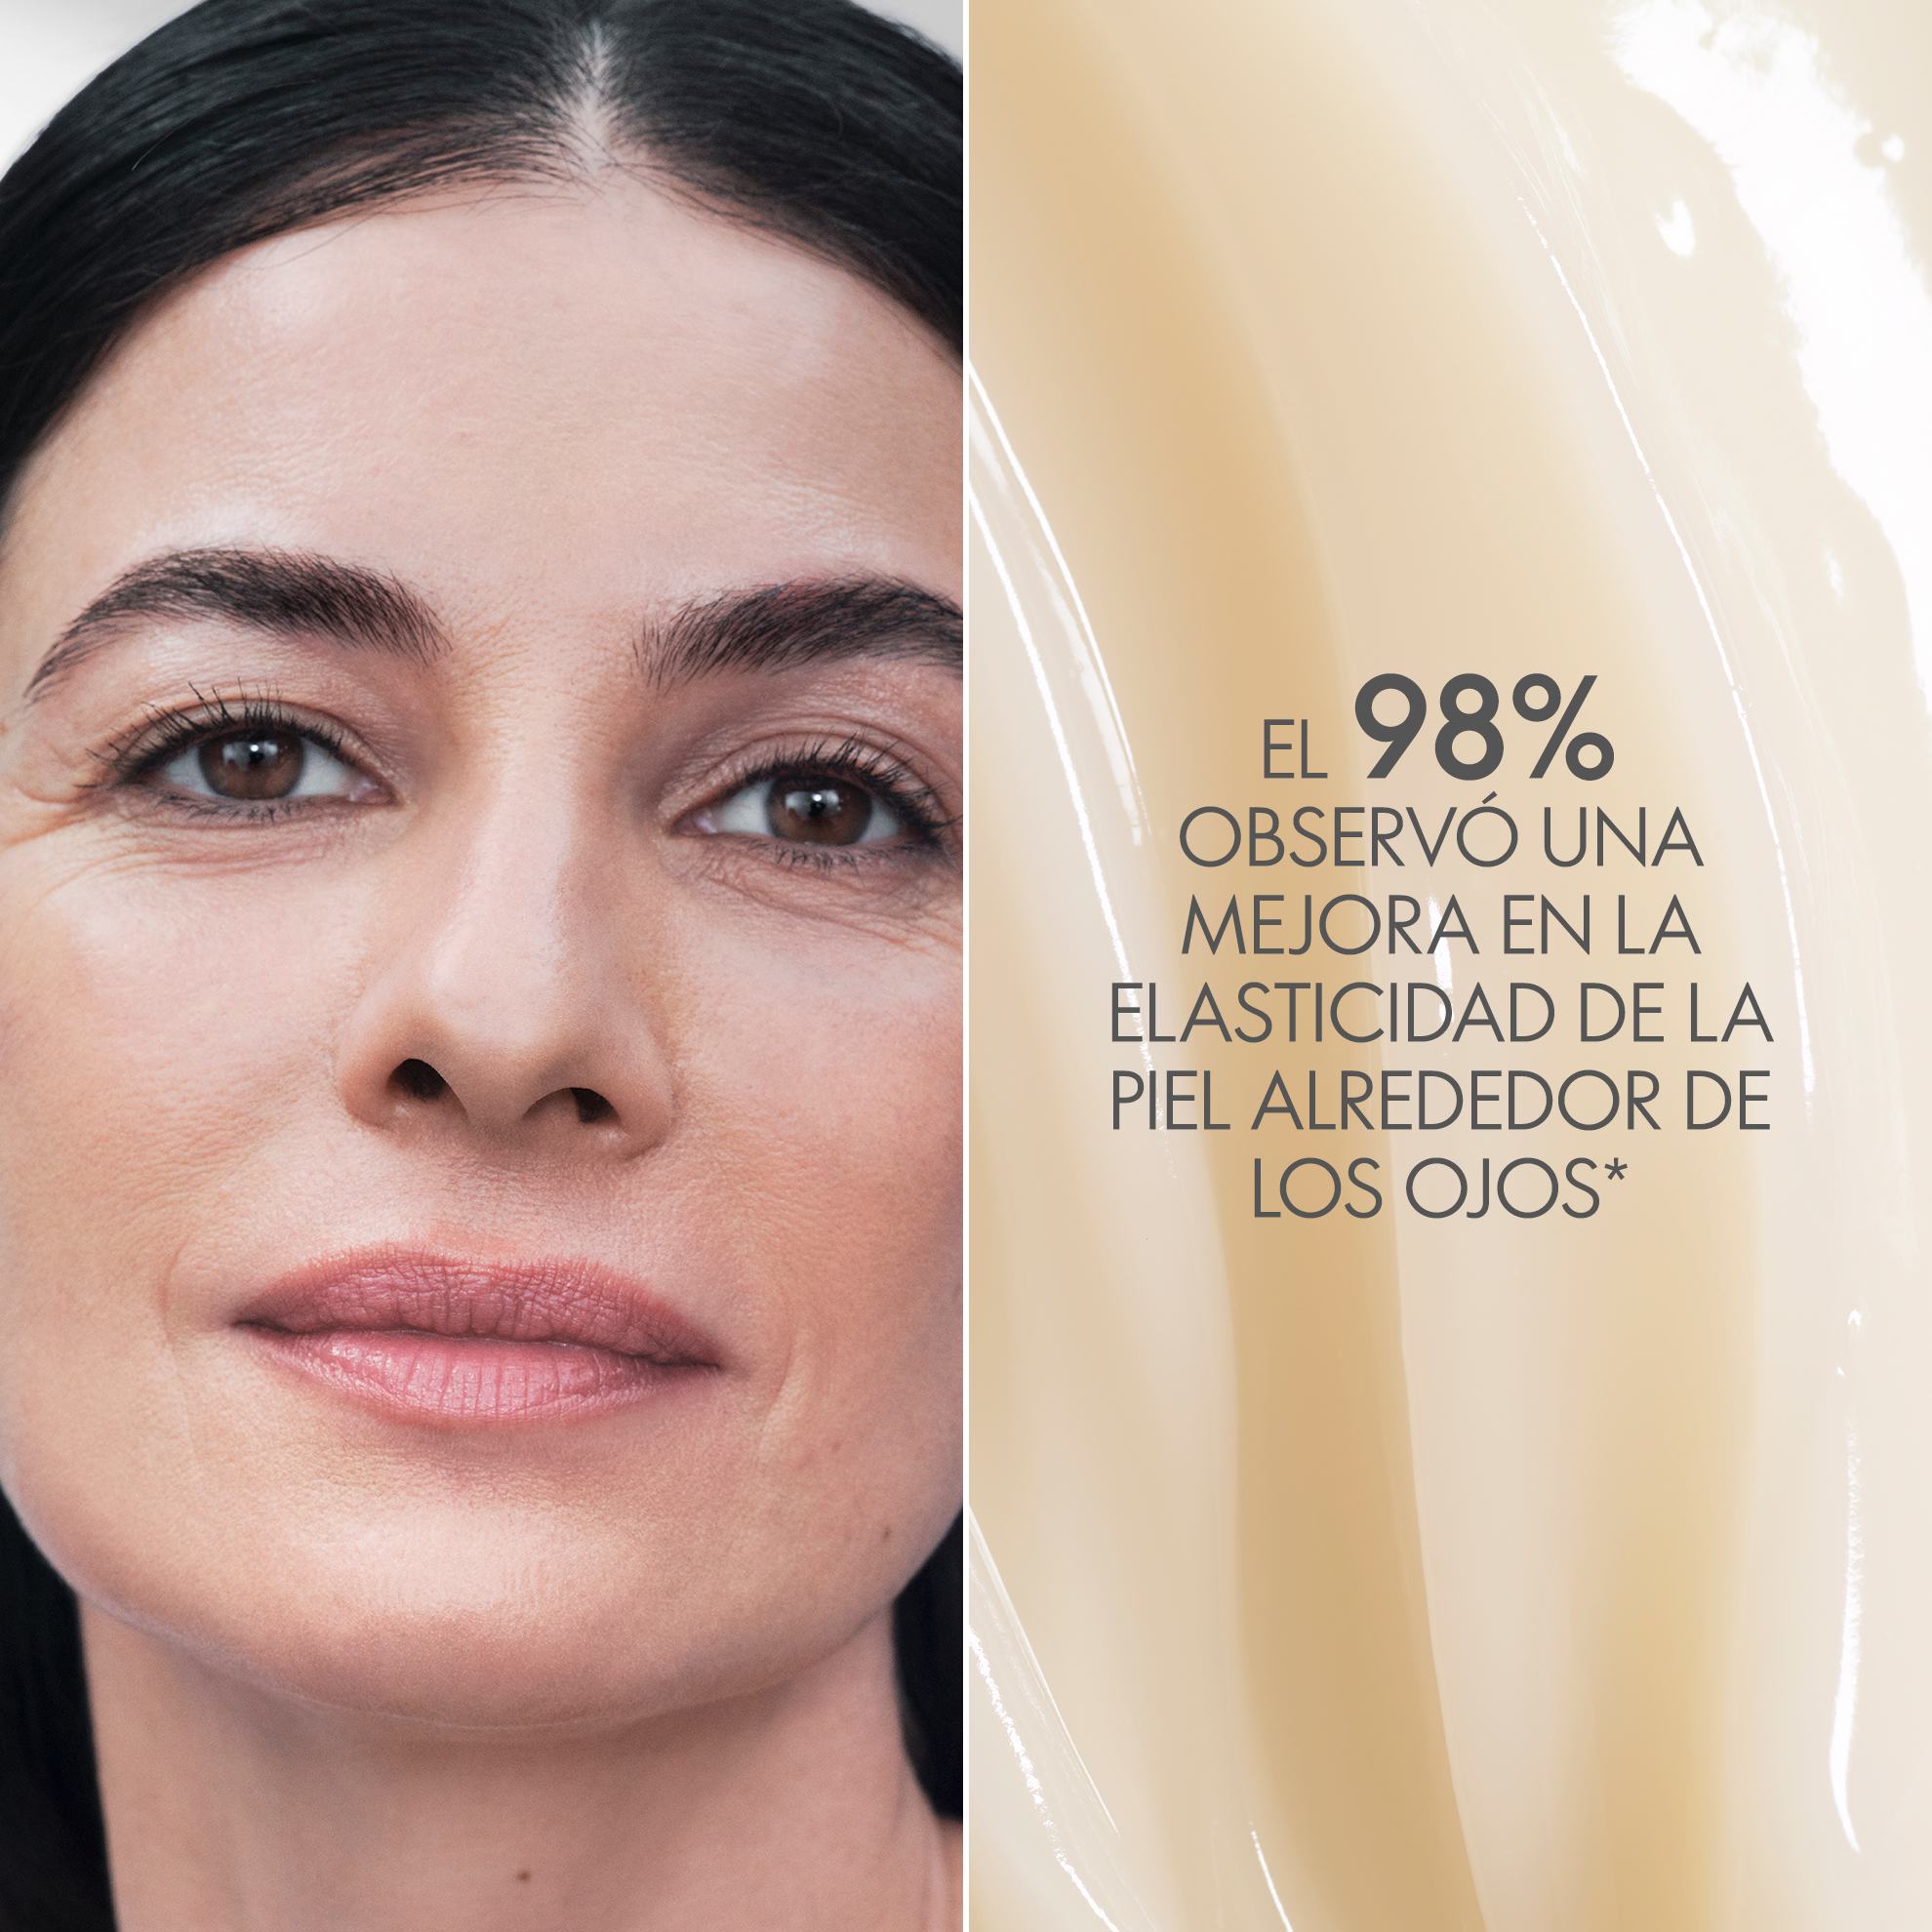 https://media-cdn.oriflame.com/productImage?externalMediaId=product-management-media%2fProducts%2f42425%2fCL%2f42425_2.png&id=18234955&version=1